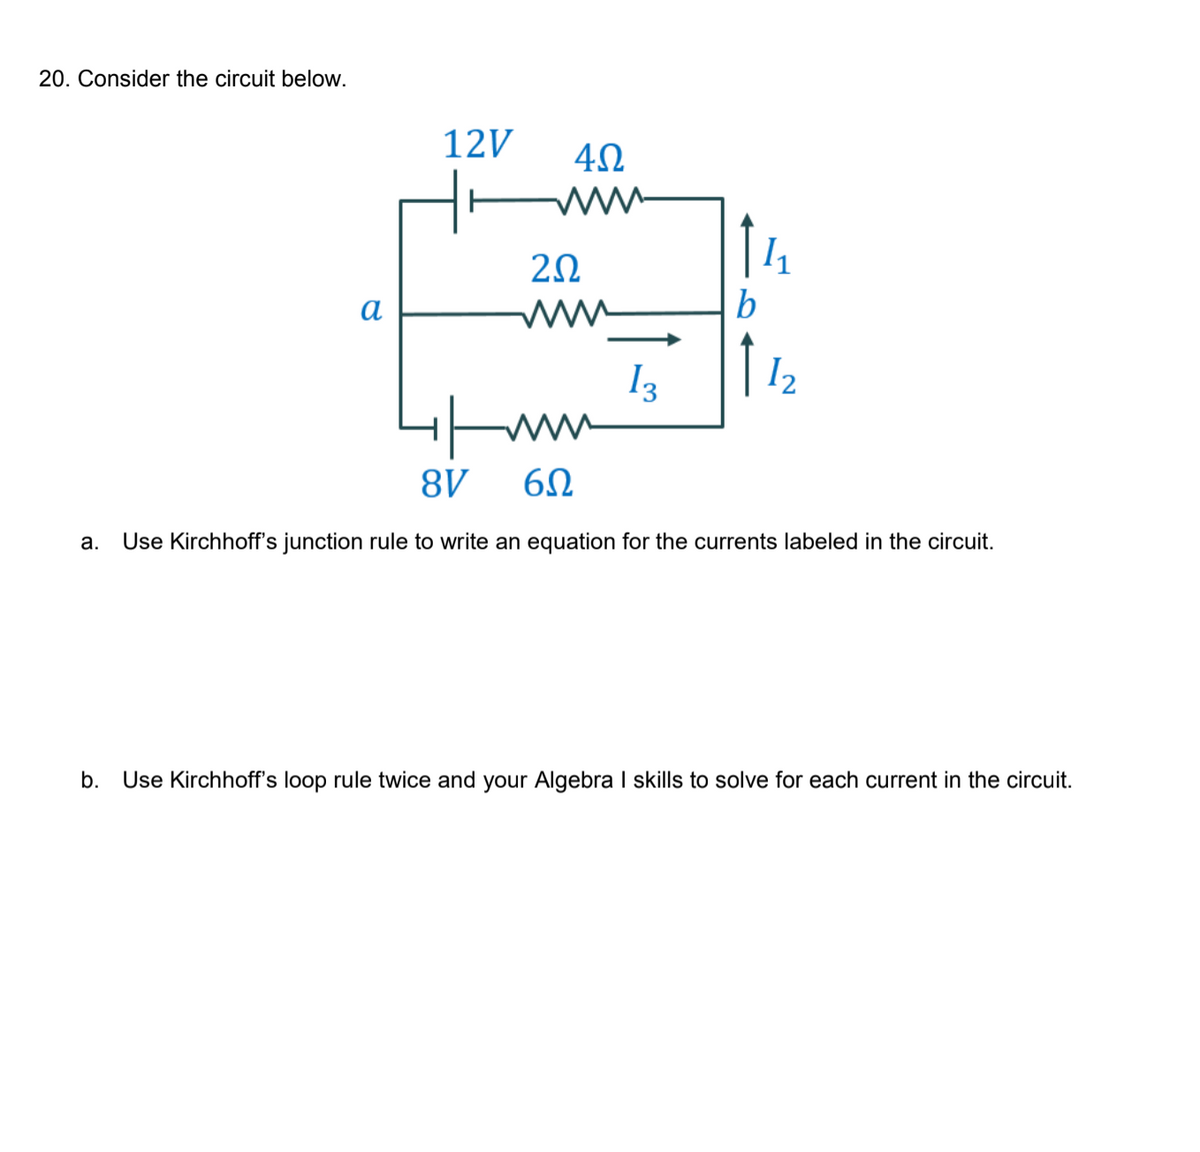 20. Consider the circuit below.
12V
2Ω
a
b
I3
| 12
8V
а.
Use Kirchhoff's junction rule to write an equation for the currents labeled in the circuit.
b.
Use Kirchhoff's loop rule twice and your Algebra I skills to solve for each current in the circuit.
